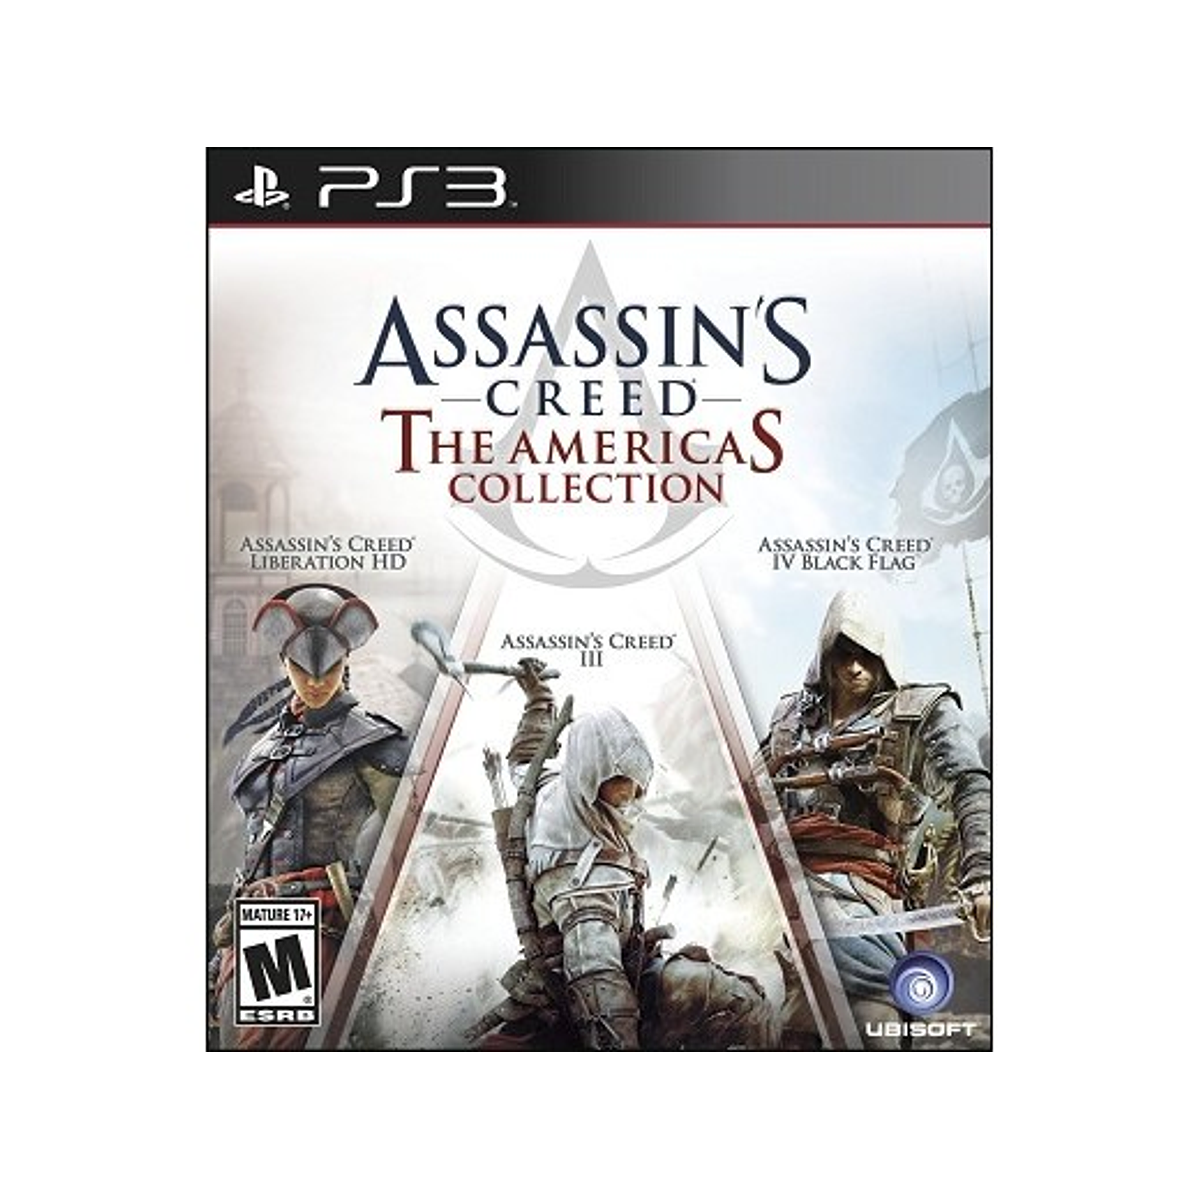 Assassin's Creed: The Americas Collection PS3 Usado